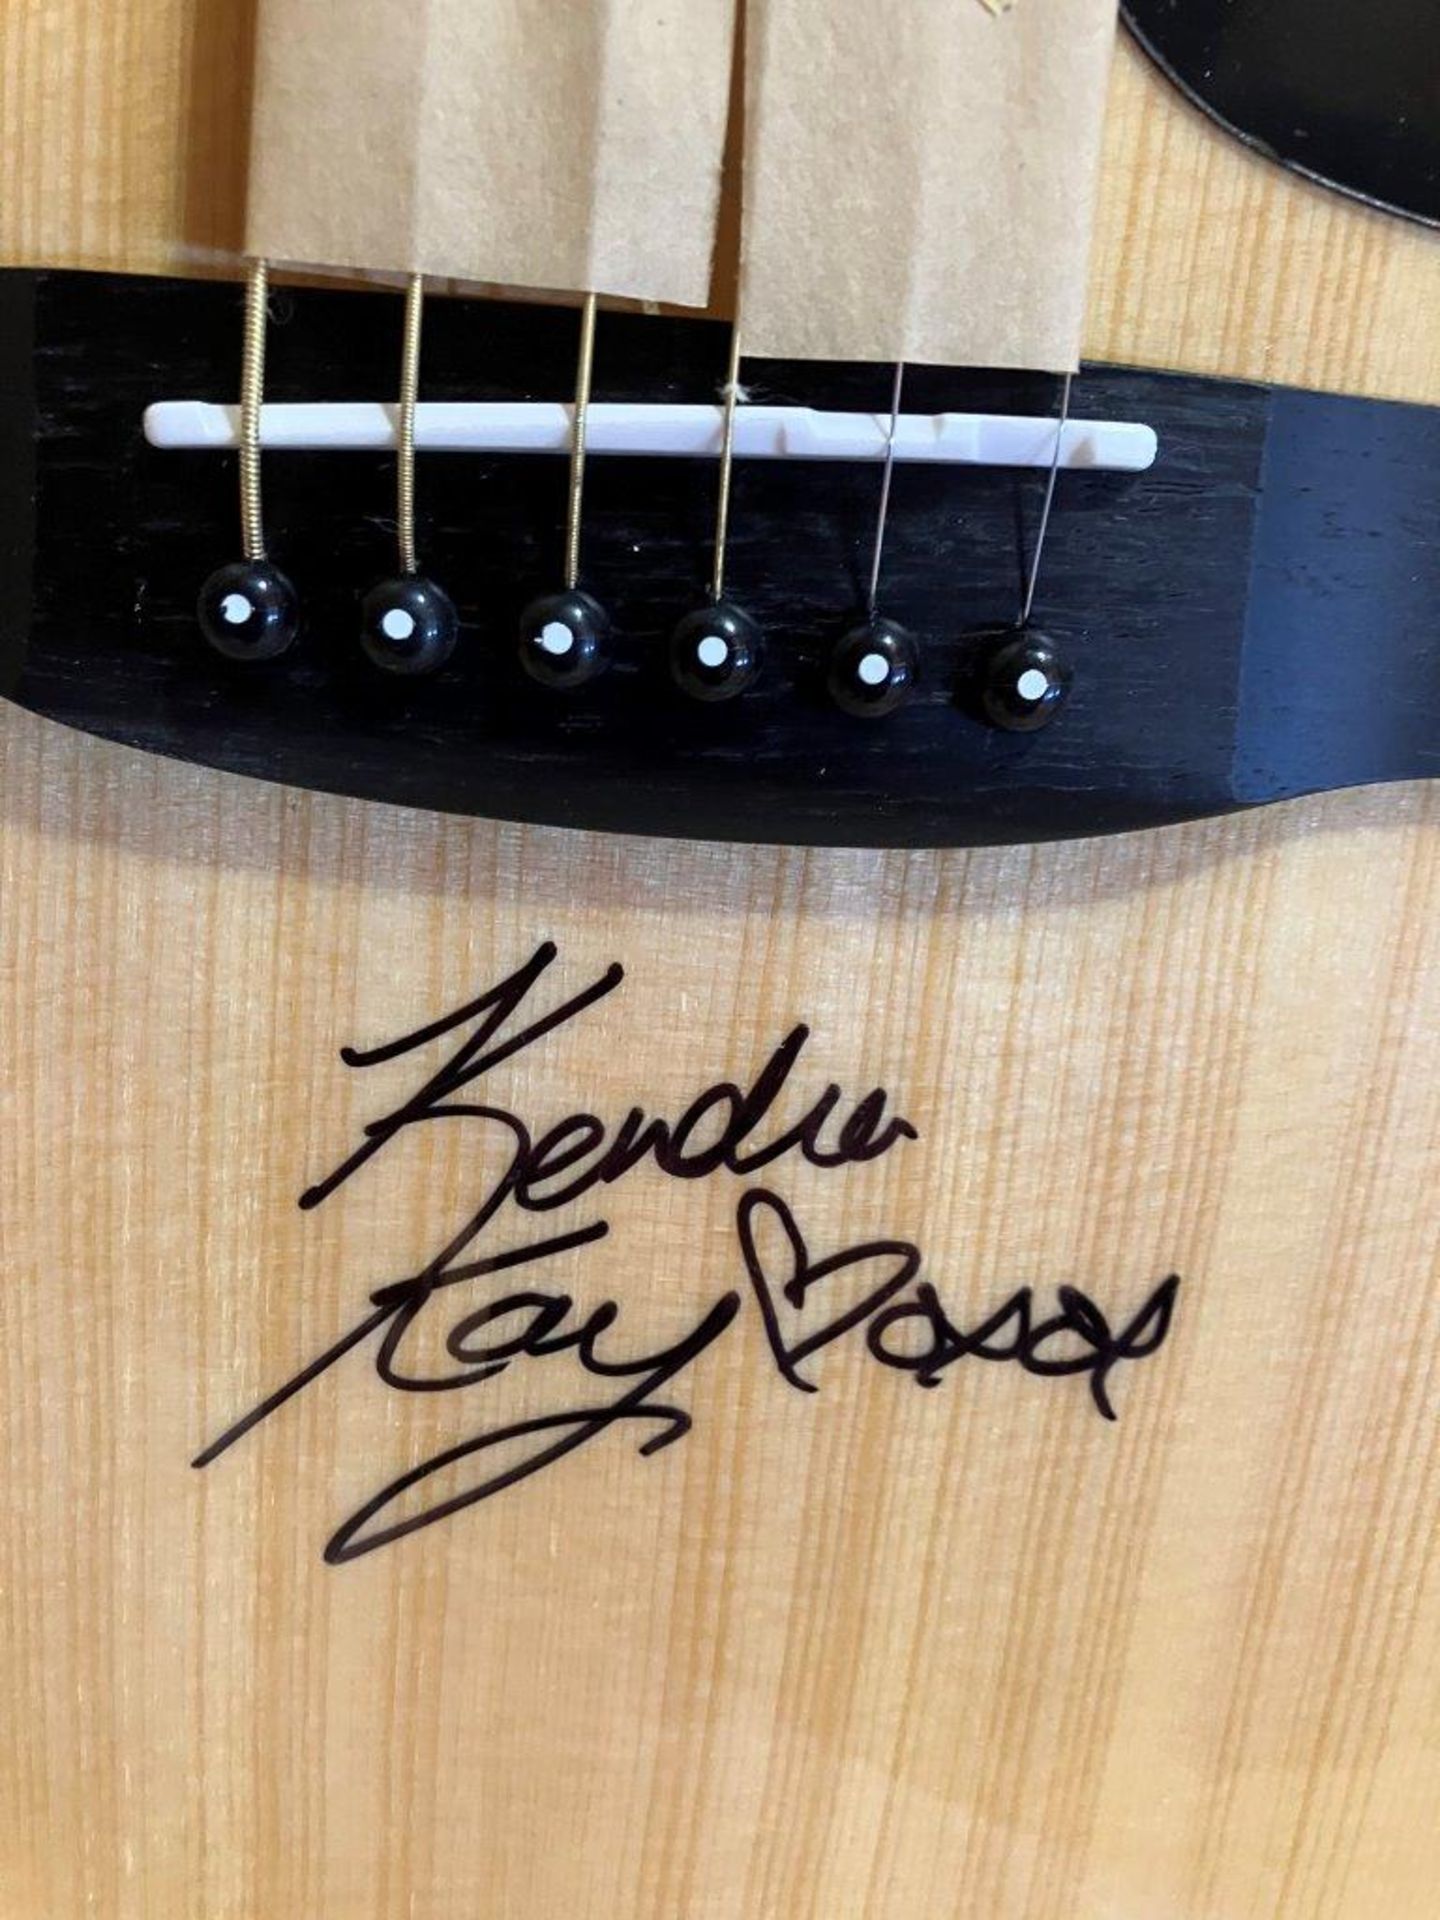 YAHAMA ACOUSTIC GUITAR SIGNED BY COUNTRY MUSICIANS - Image 3 of 5